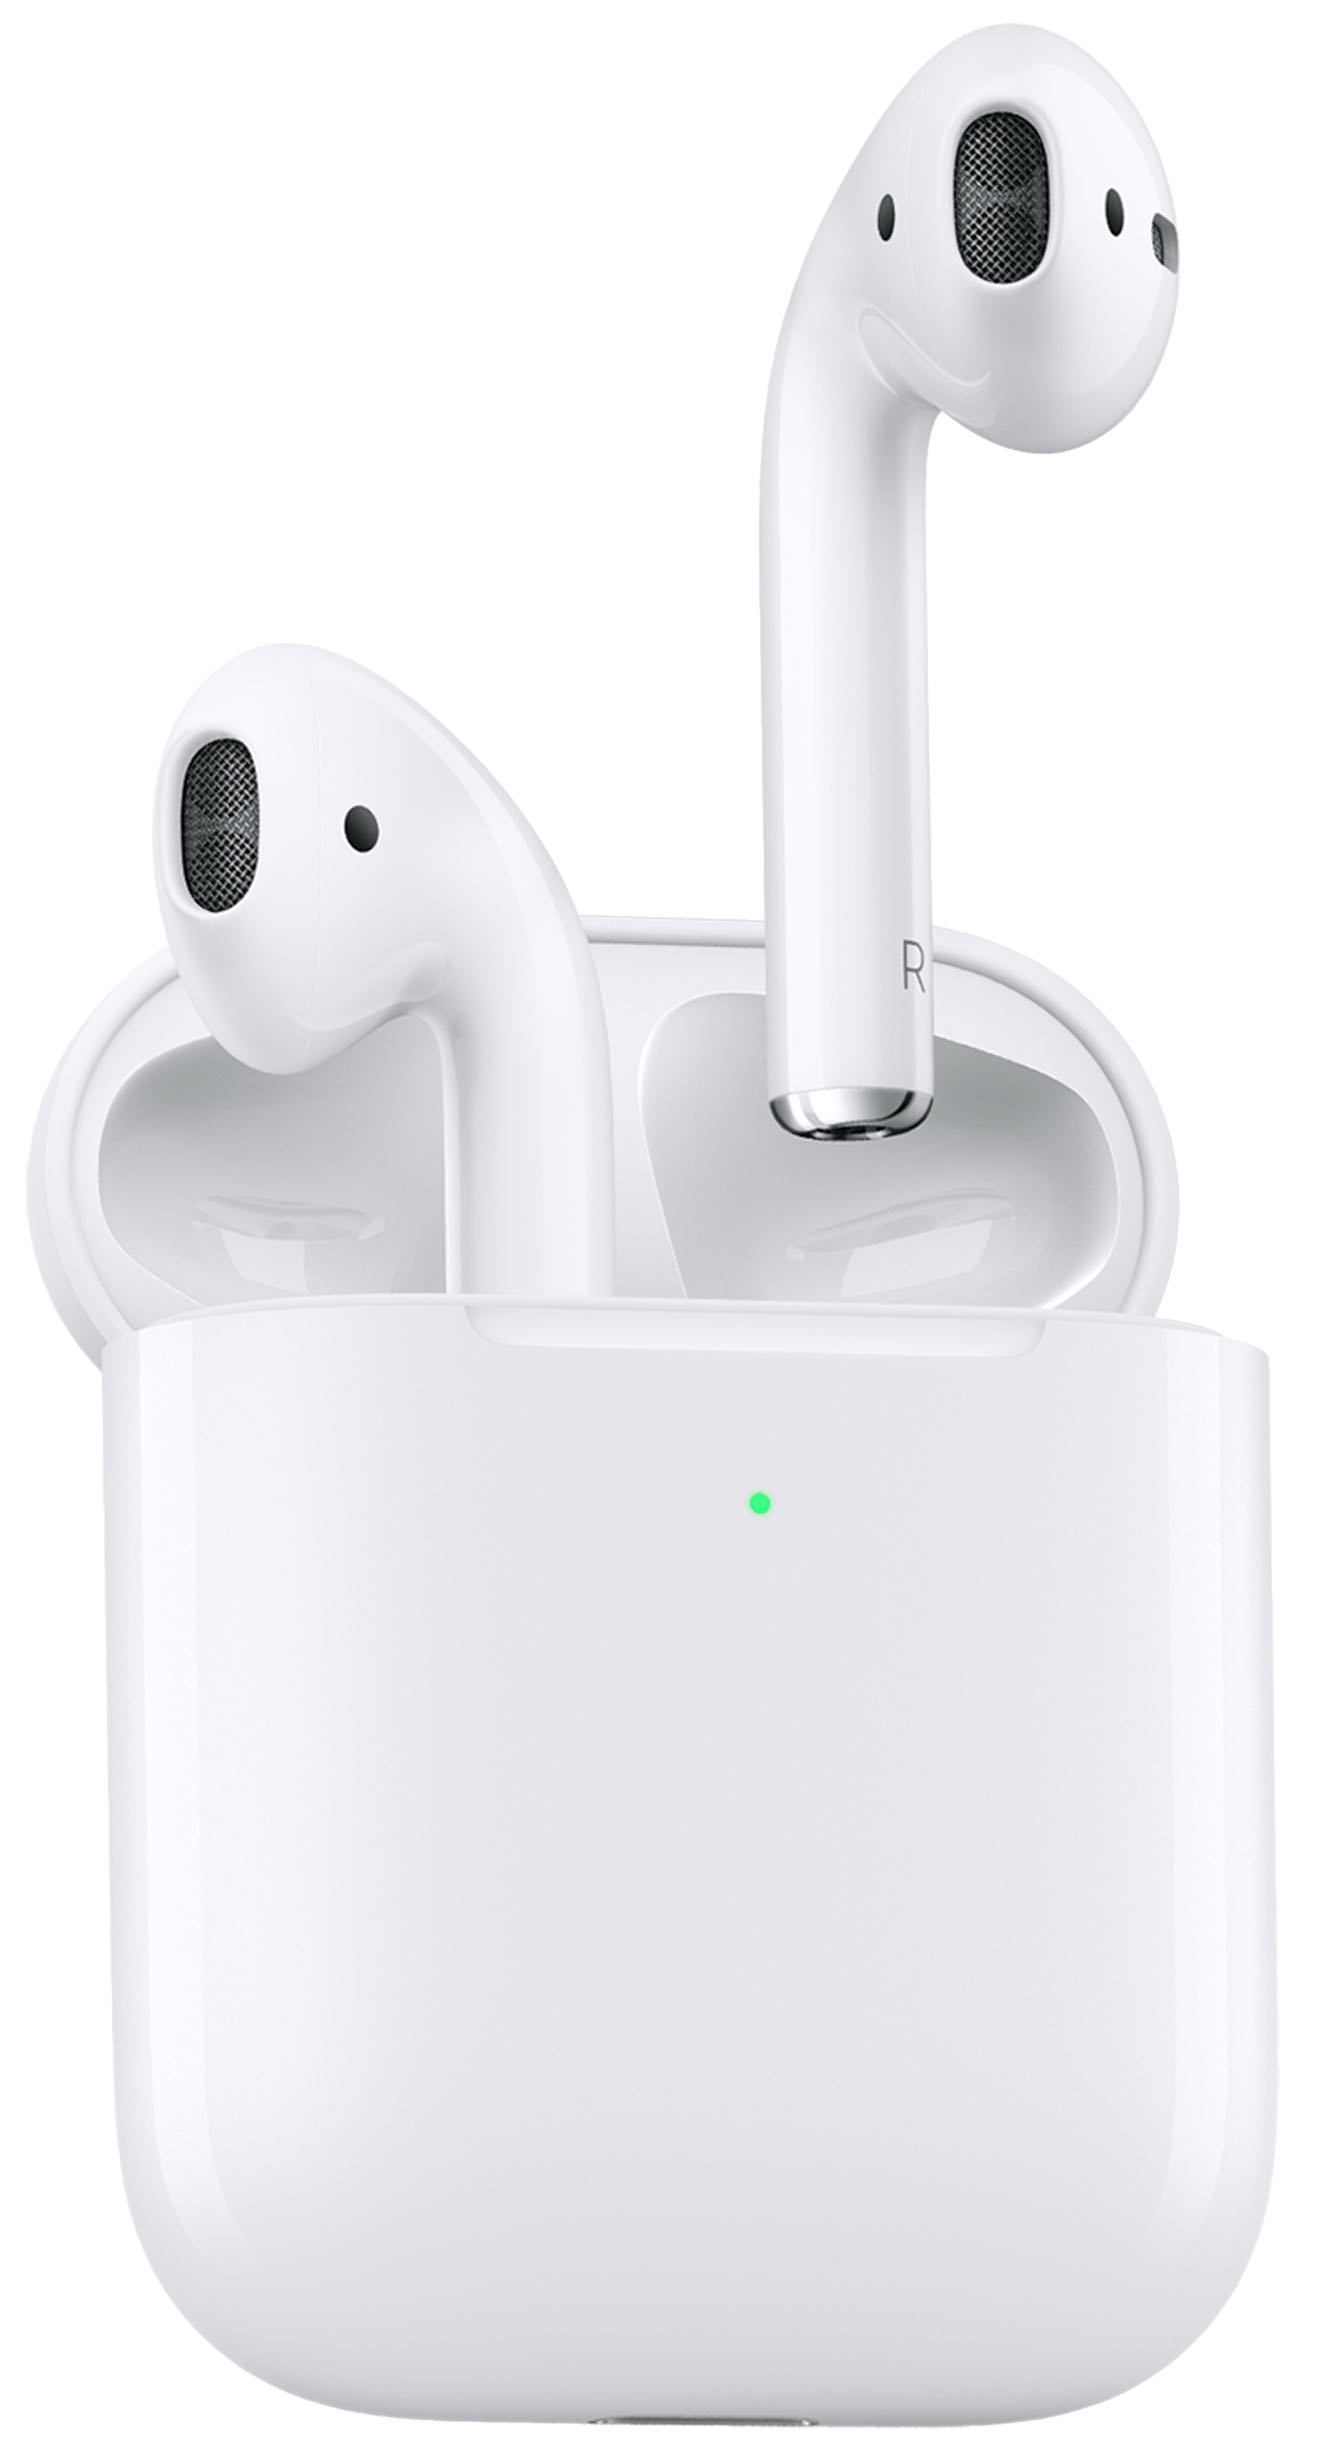 Existing AirPods owners can buy the new standalone $79 Qi wireless 